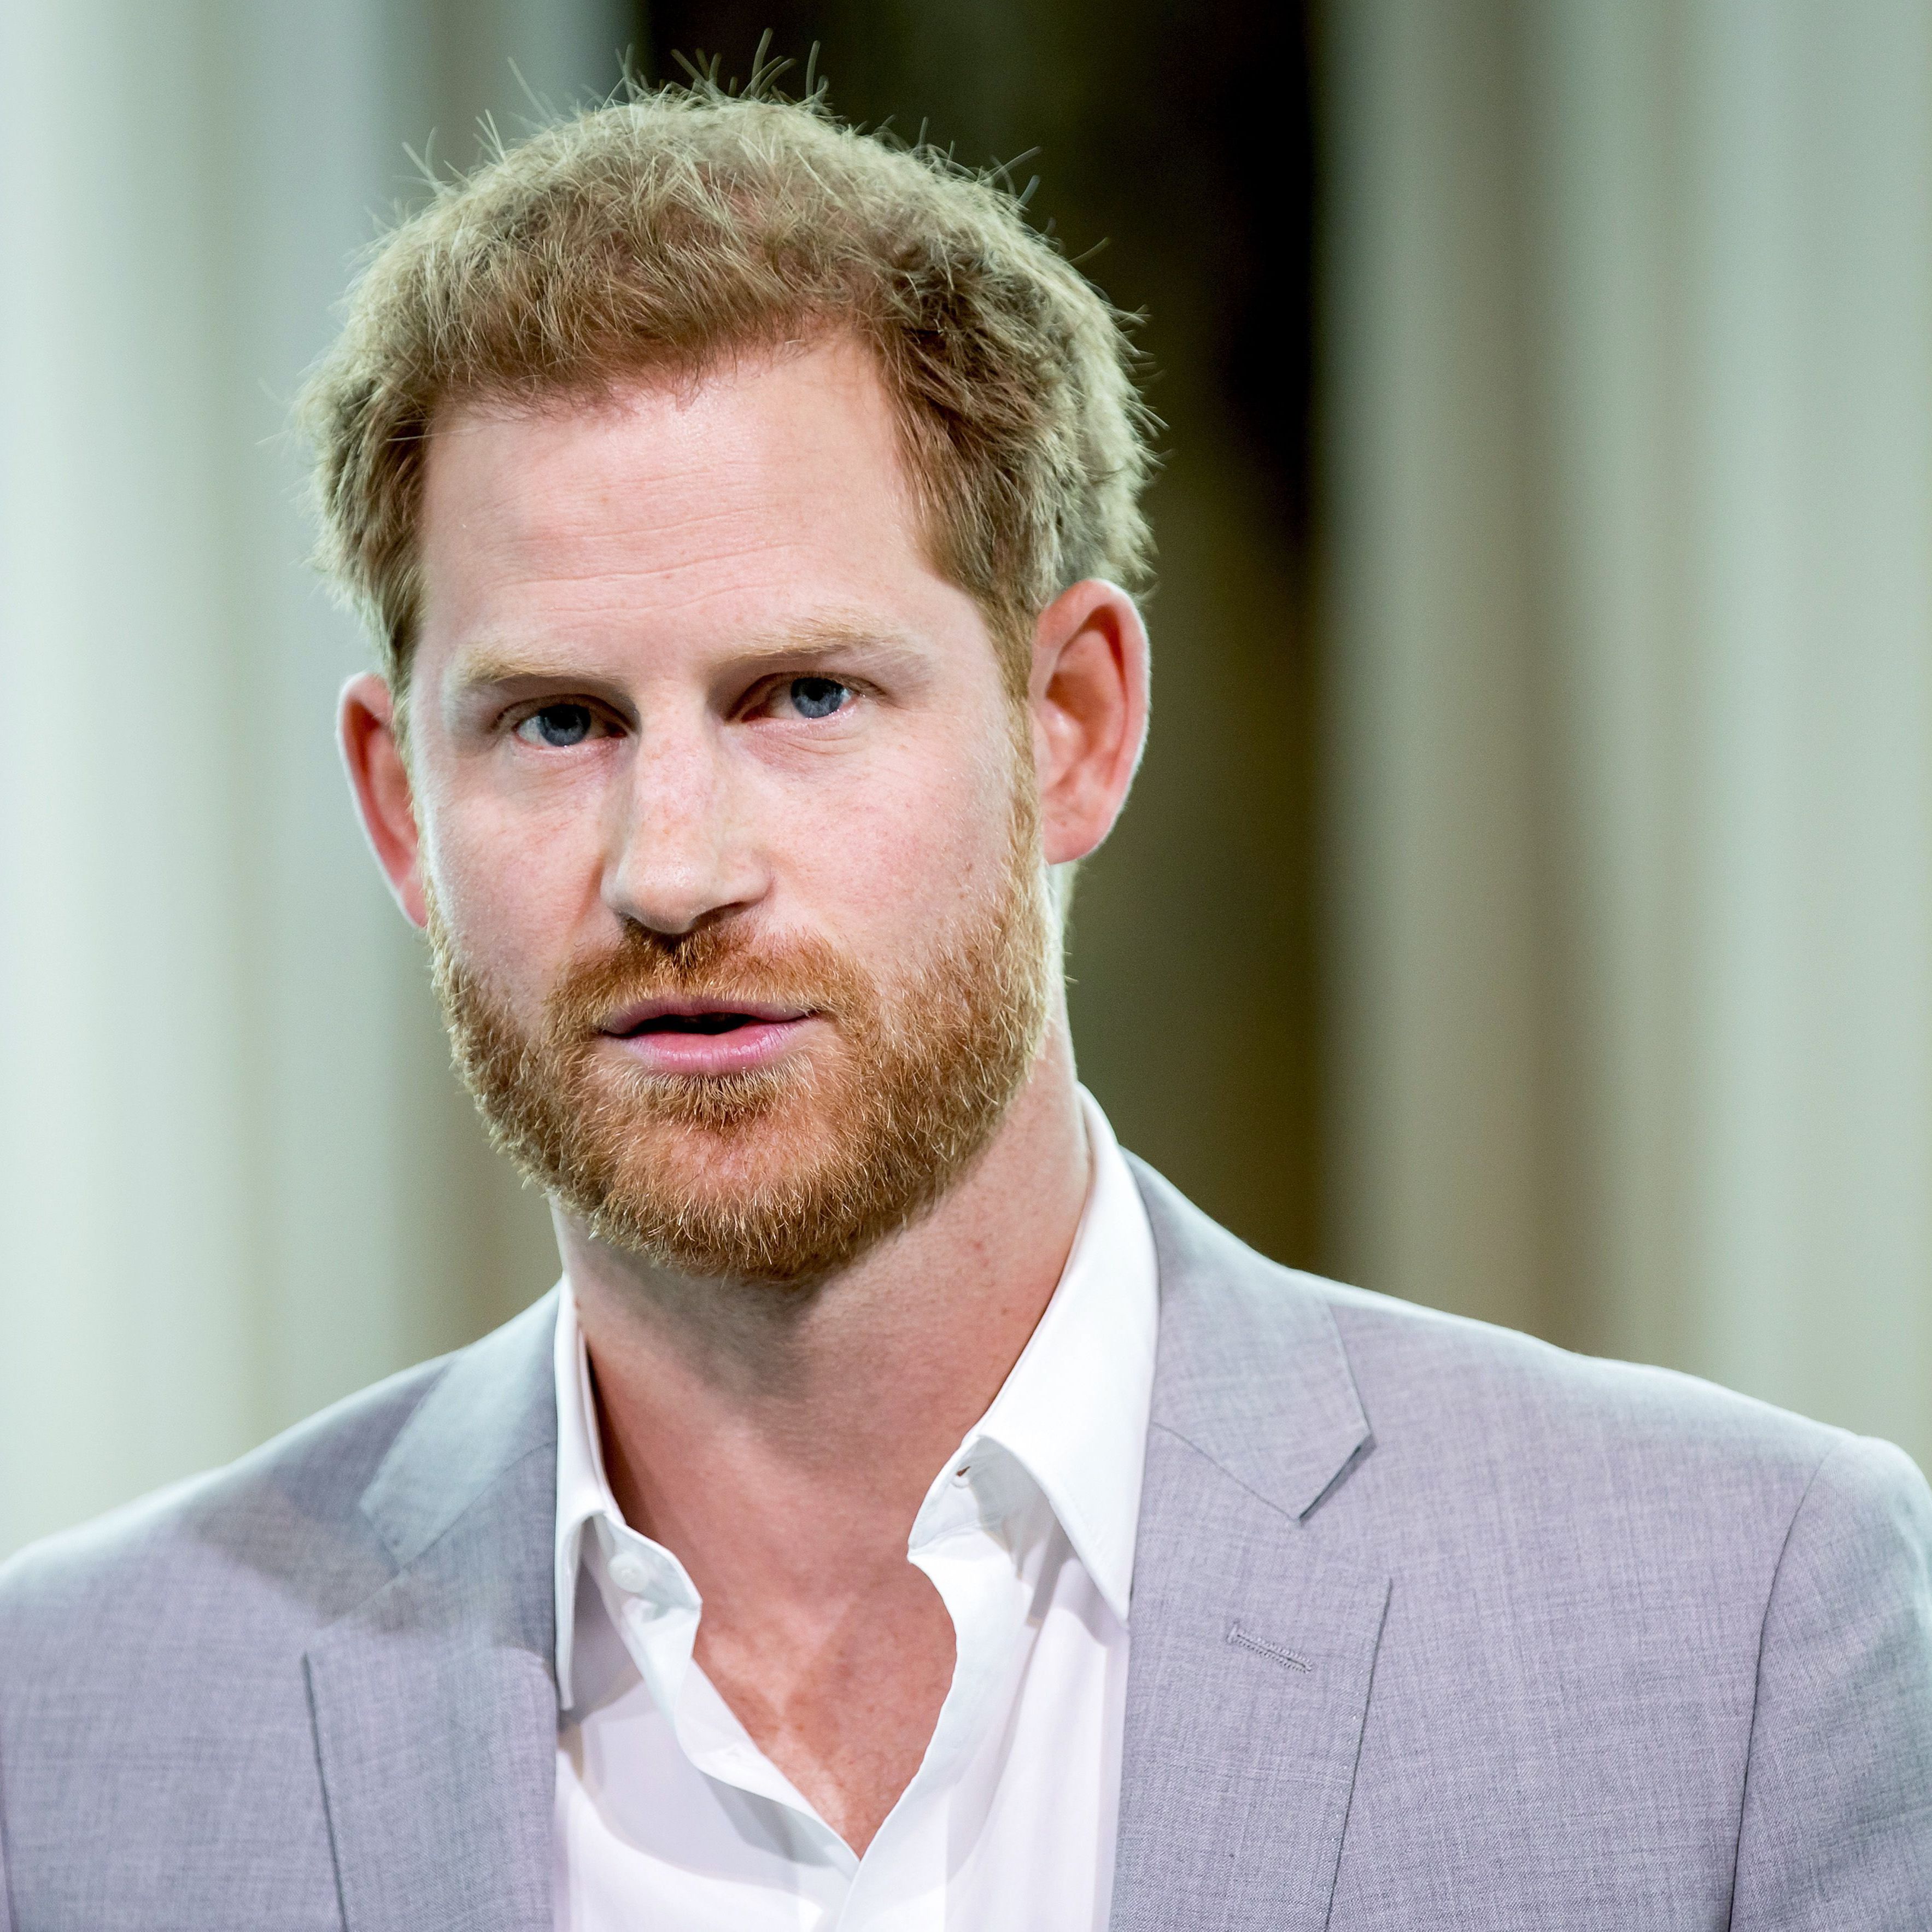 Prince Harry Defends Lady Susan Hussey, Who Made Racist Comments at Royal Event